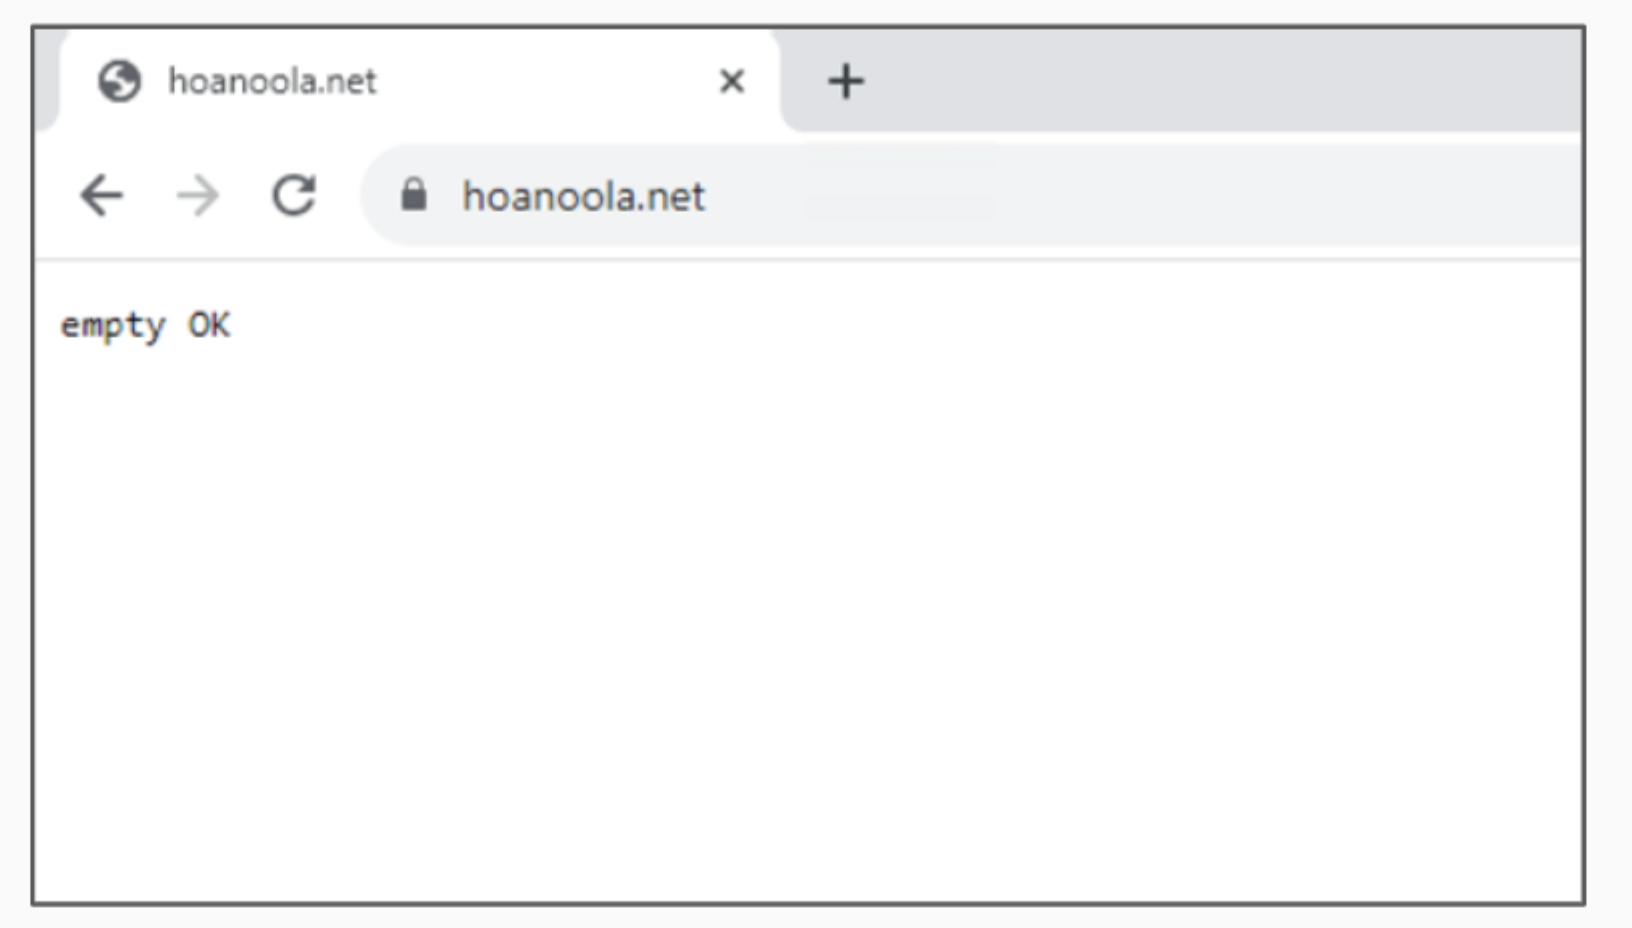 Image 4 is a screenshot of an empty web page. It says empty OK. The address is hoanoola[.]net.